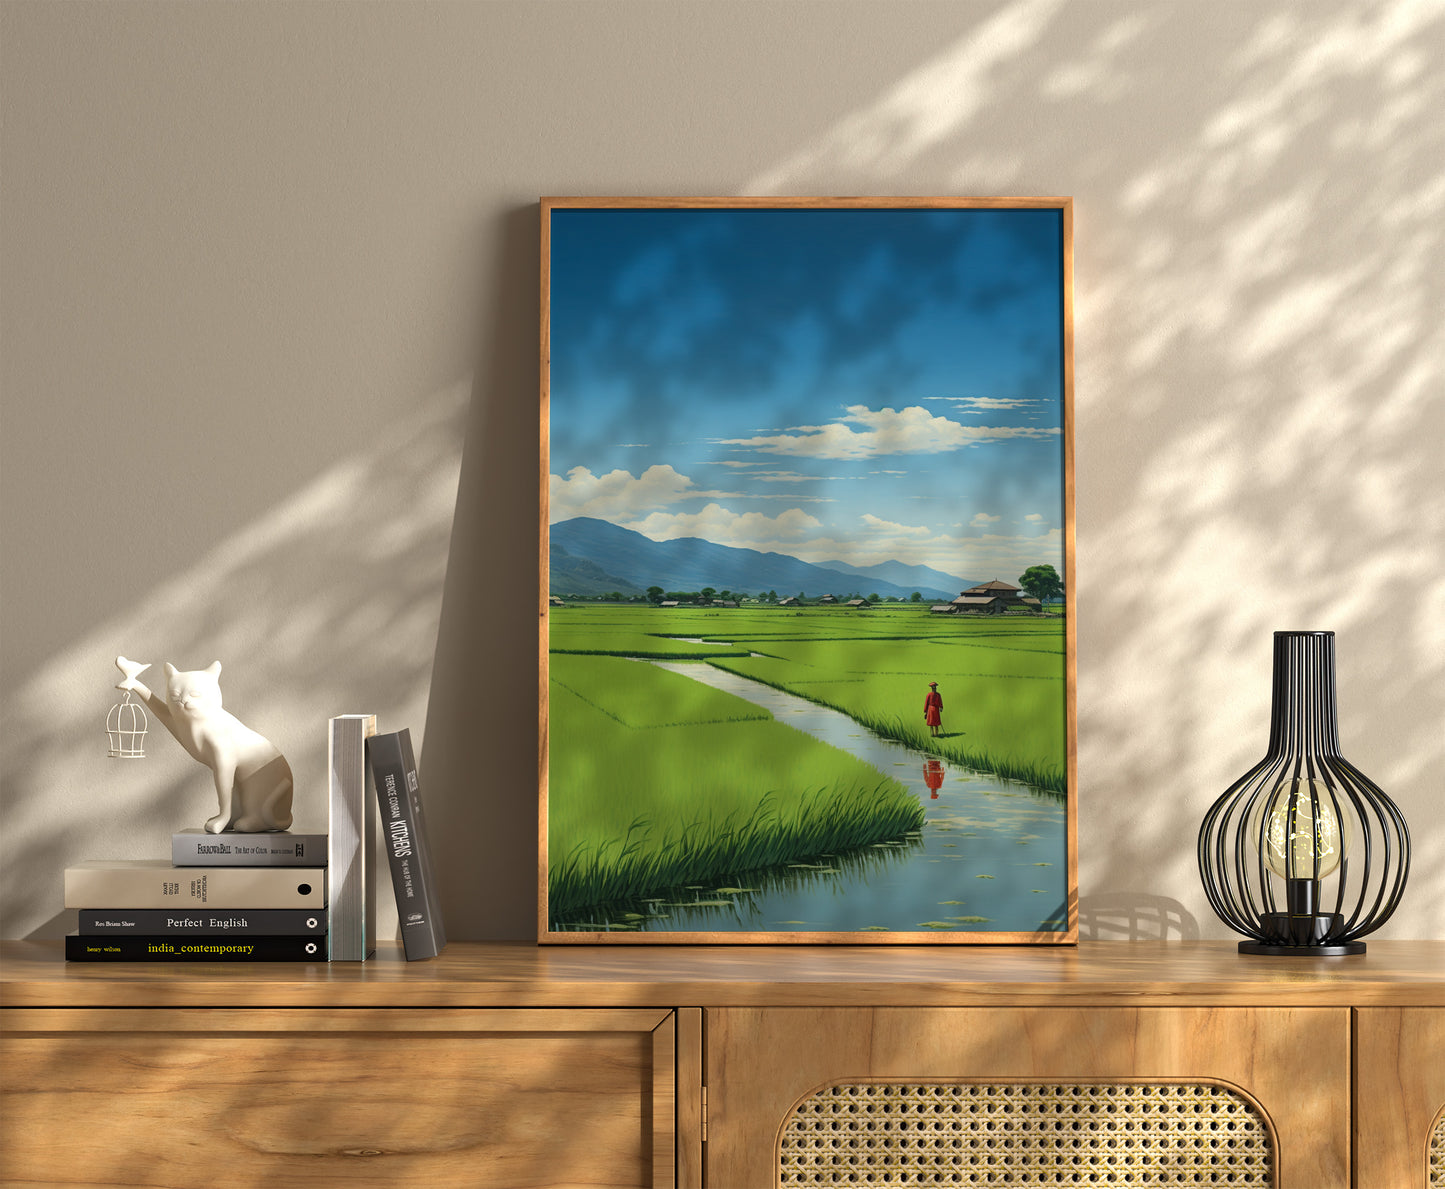 A framed landscape painting on a wall above a wooden sideboard with books and decor items.